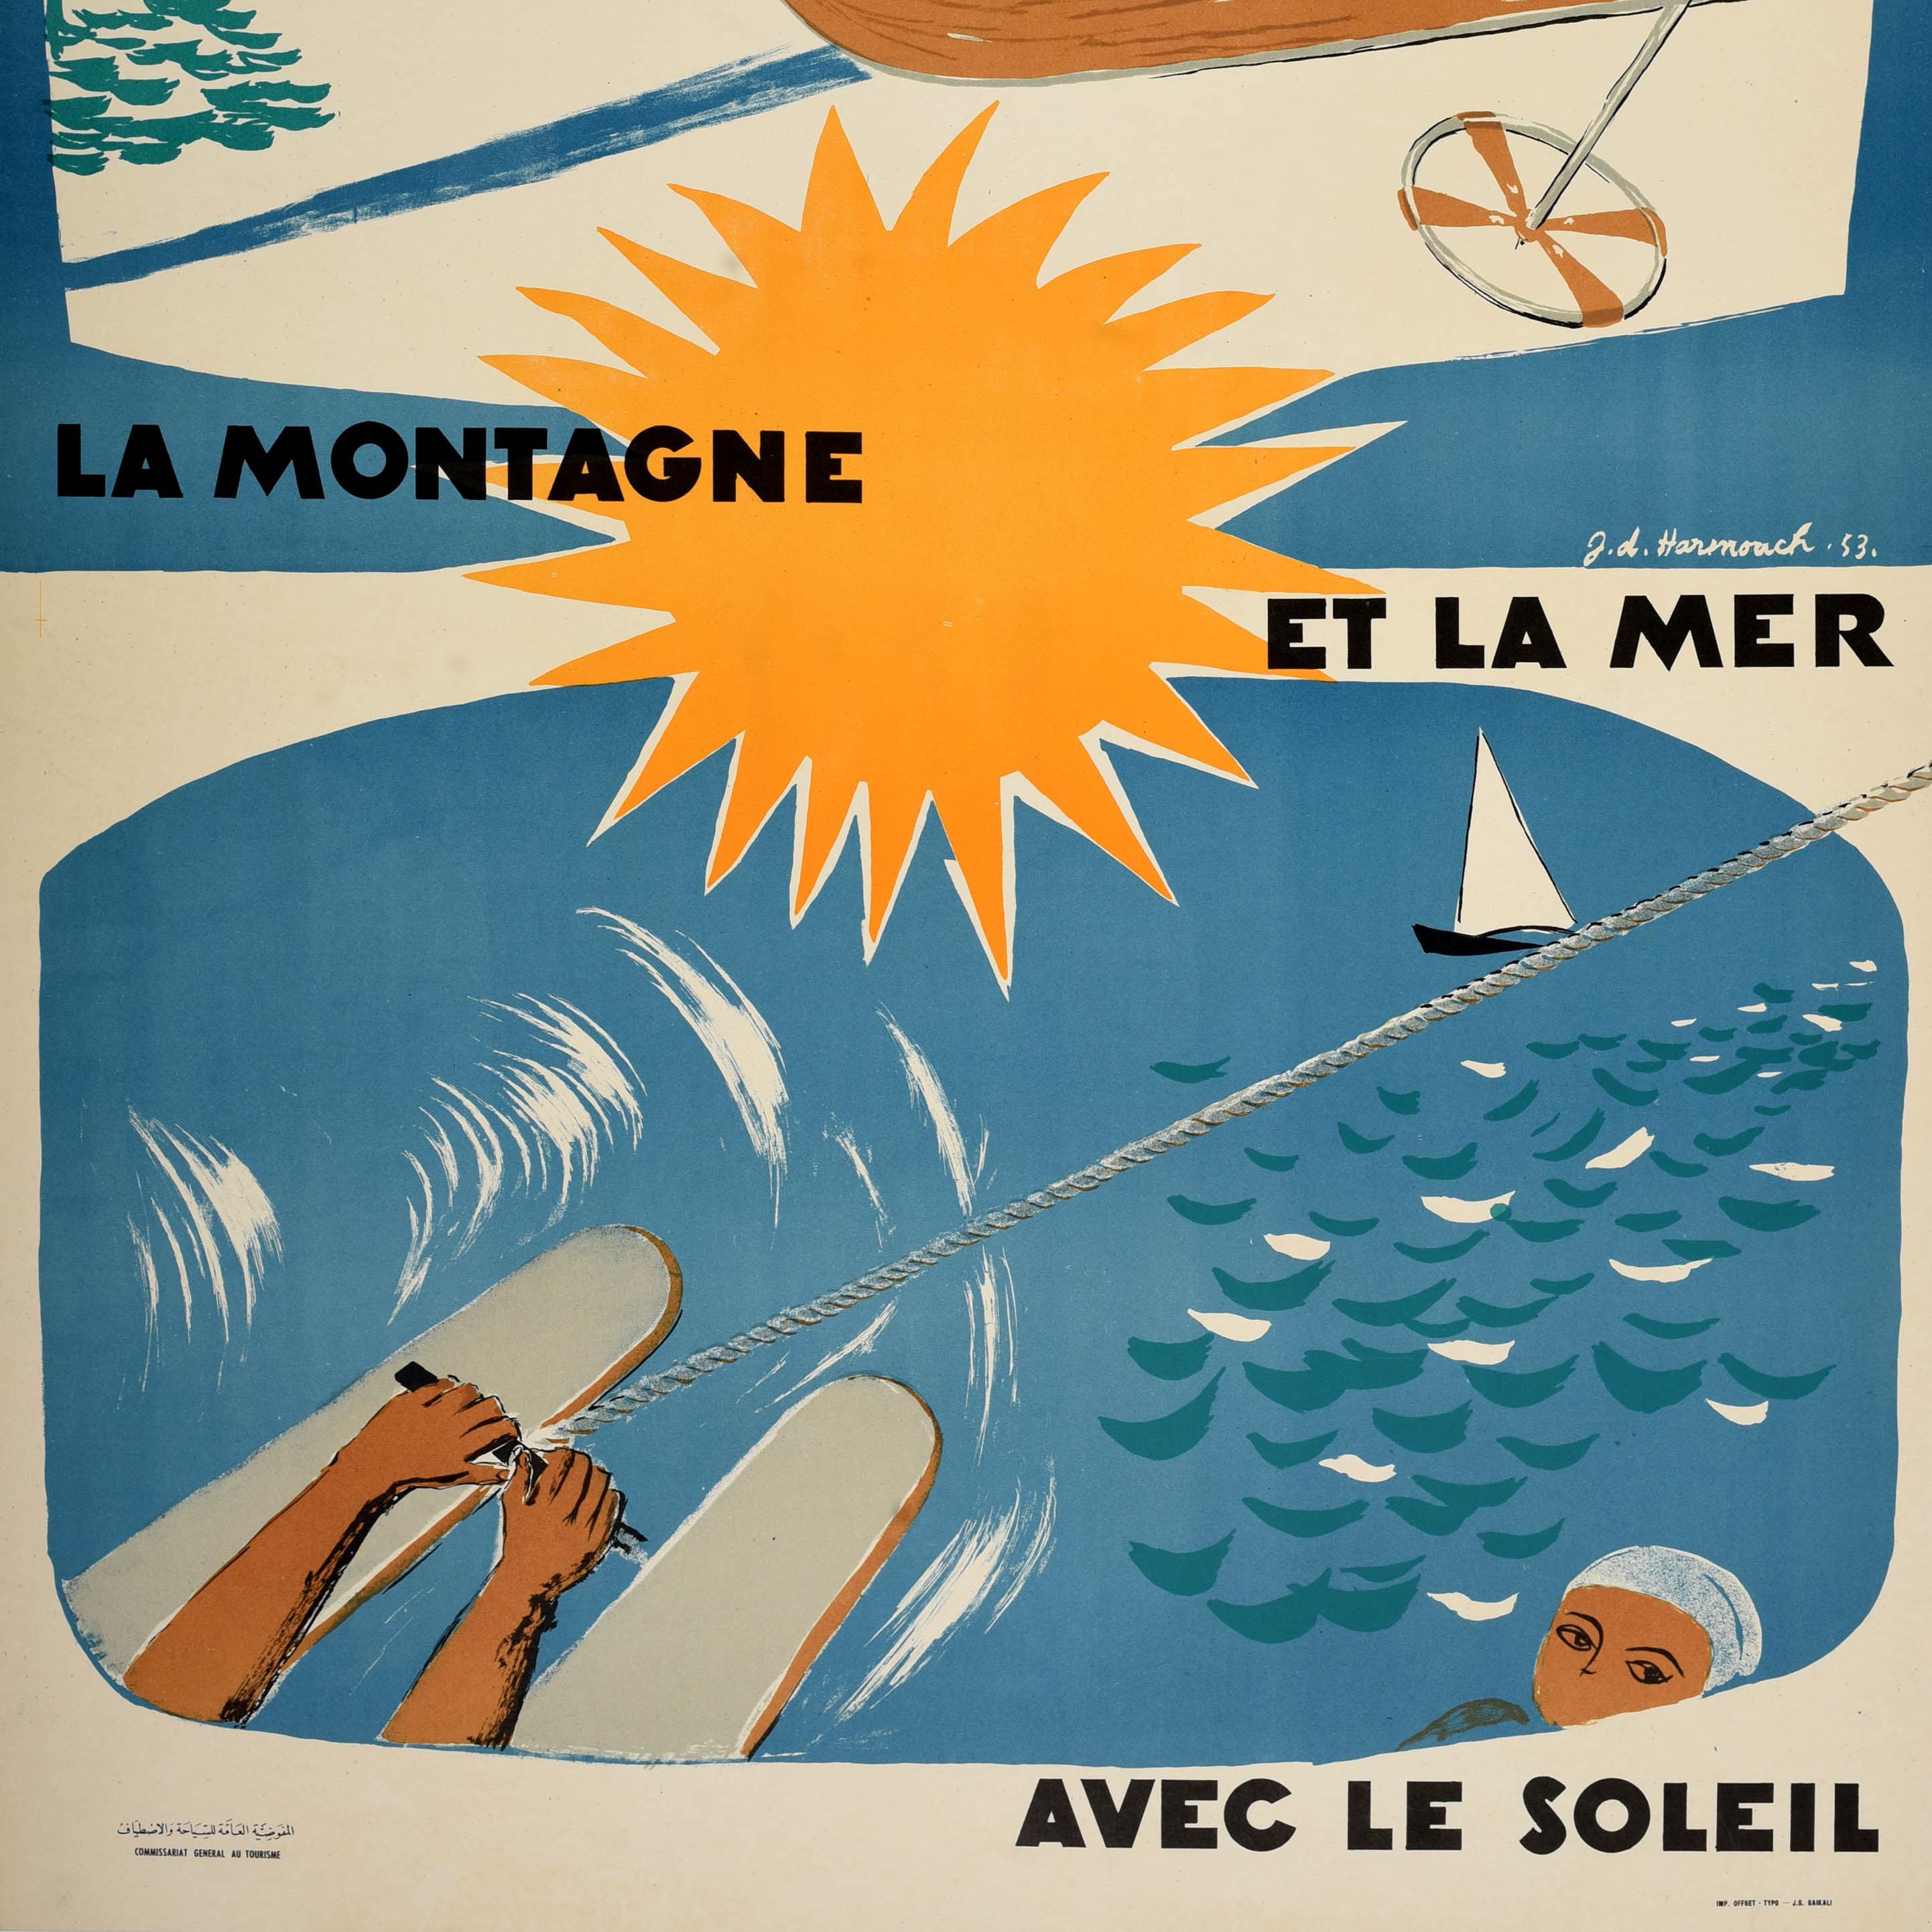 Original vintage Middle East travel poster - Au Liban La Montagne et la Mer avec le Soleil / In Lebanon The Mountain and the Sea with the Sun - featuring two sport illustrations of winter skiing and summer watersports on blue backgrounds depicting a